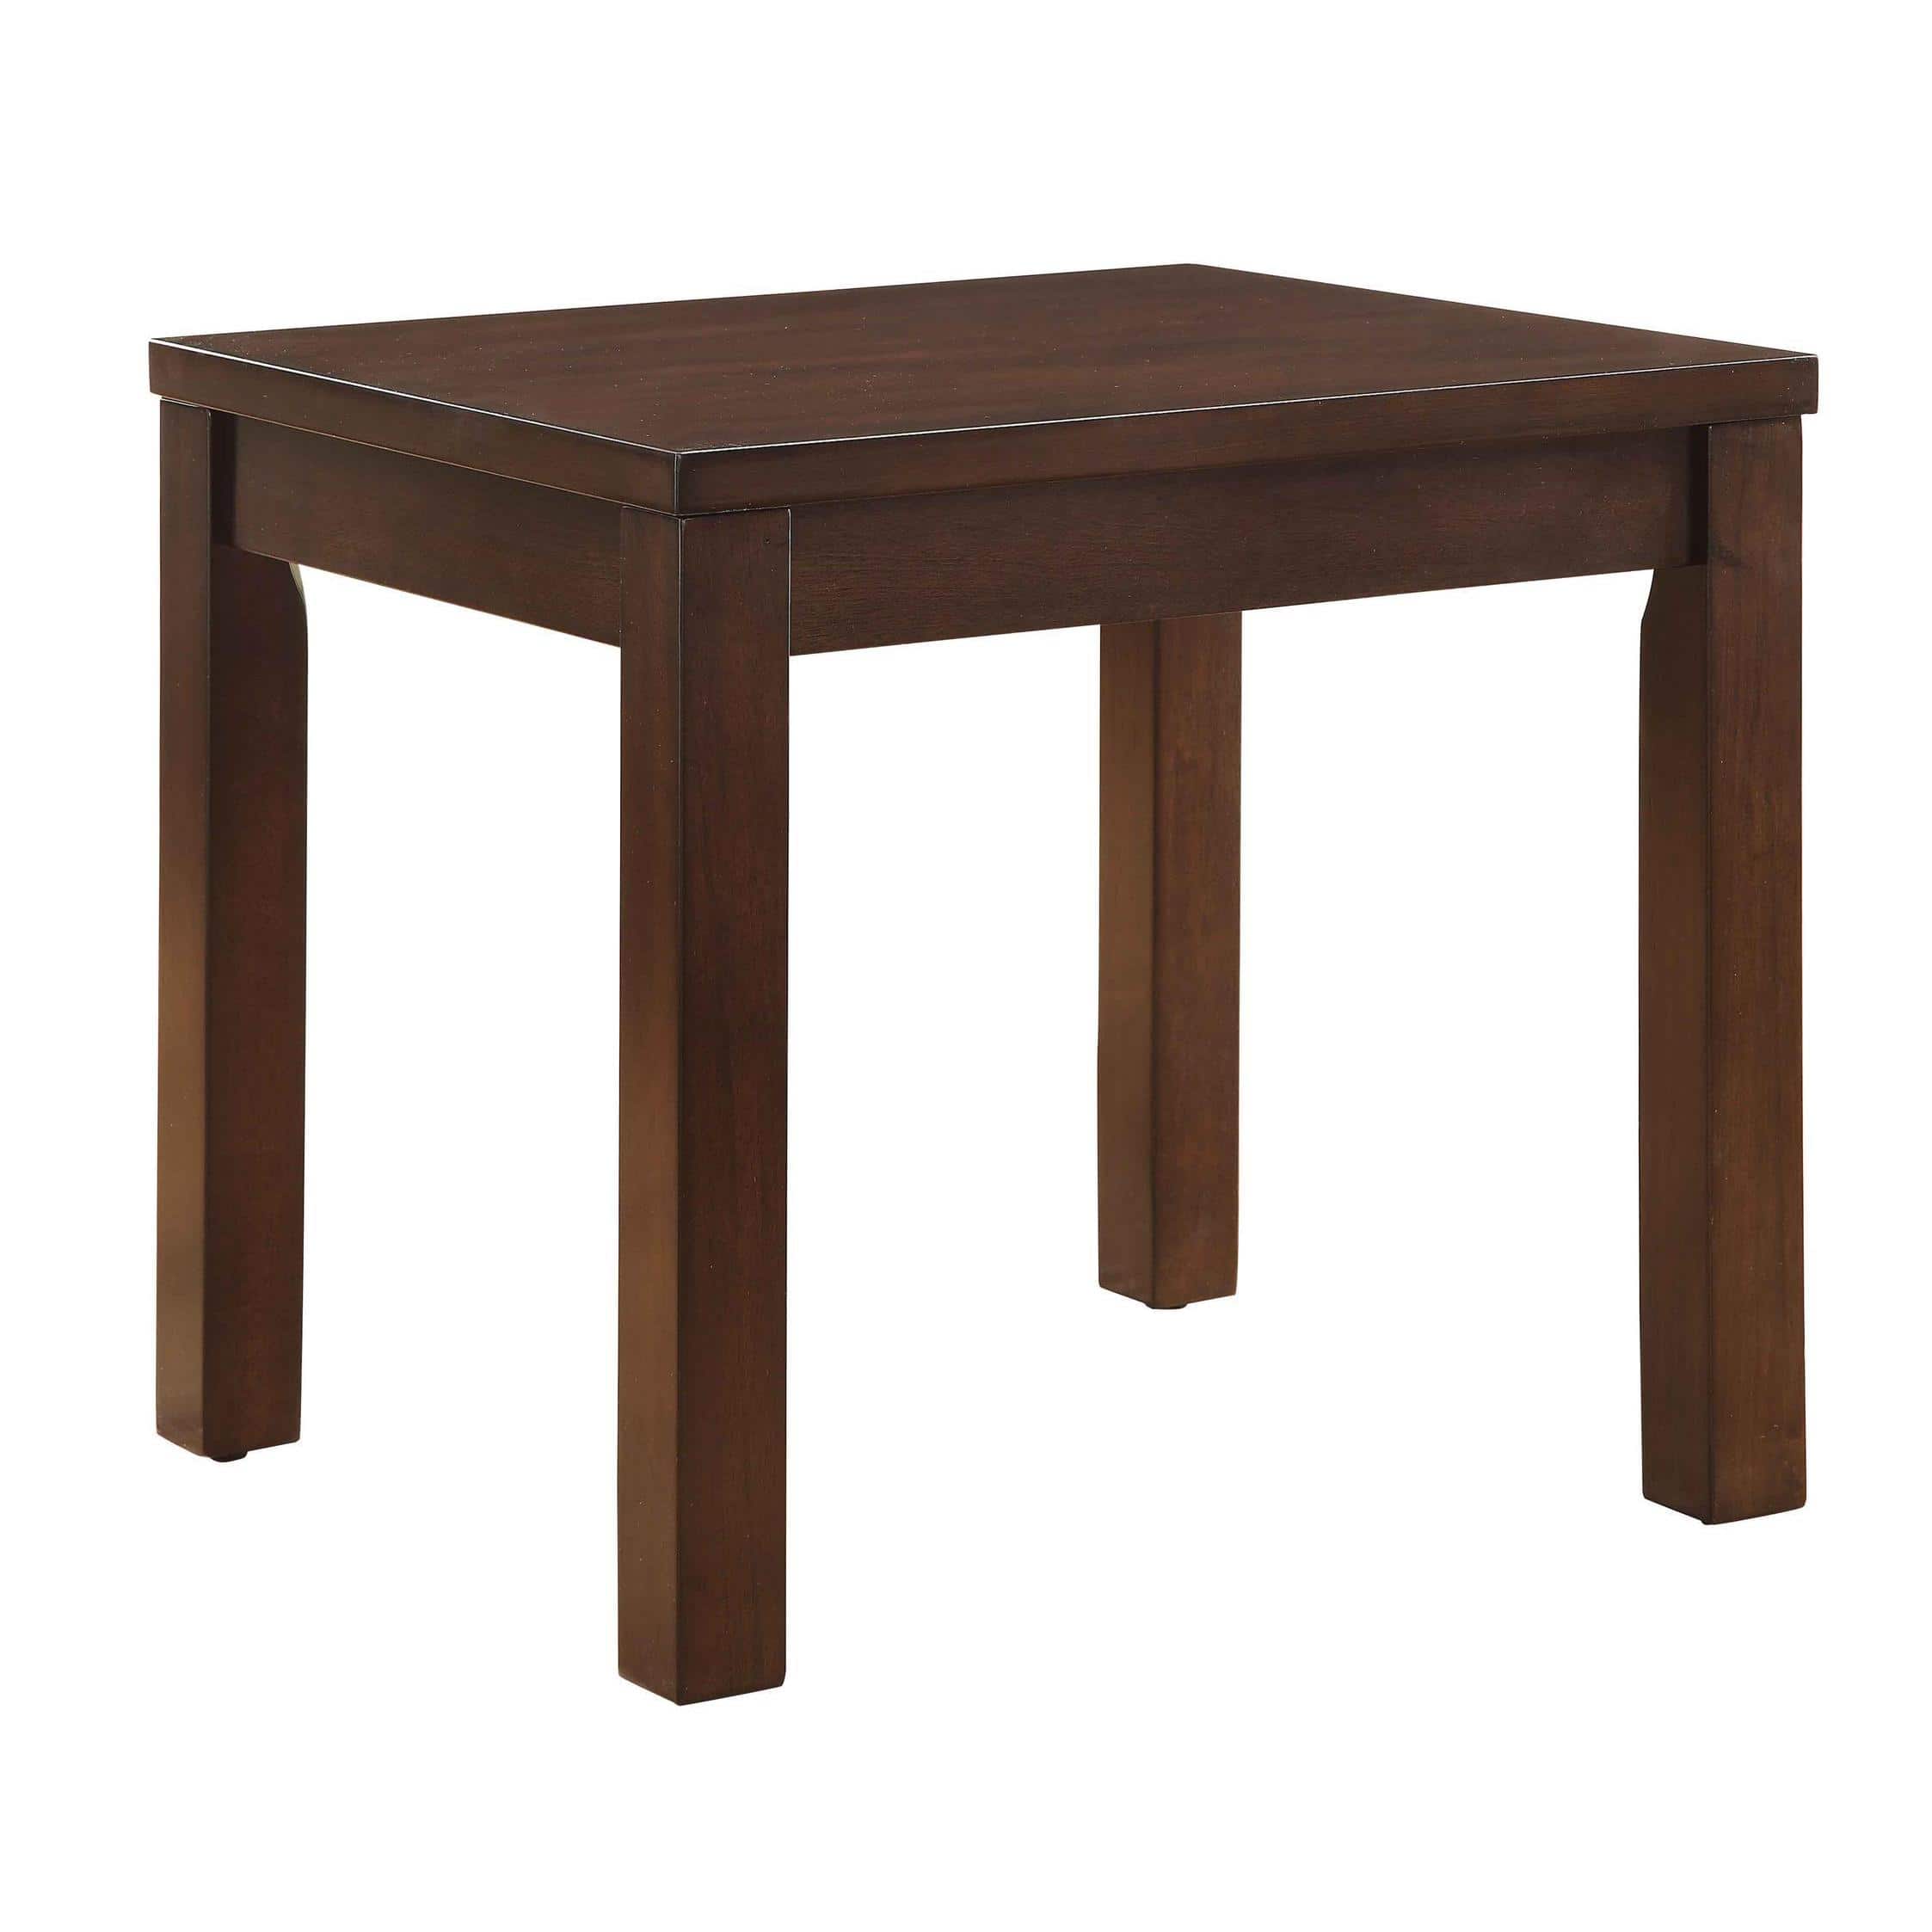 ACME Malak 3Pc Pack Coffee/End Table Set, Walnut-Finish:Walnut,Style:Contemporary/Casual - image 4 of 4